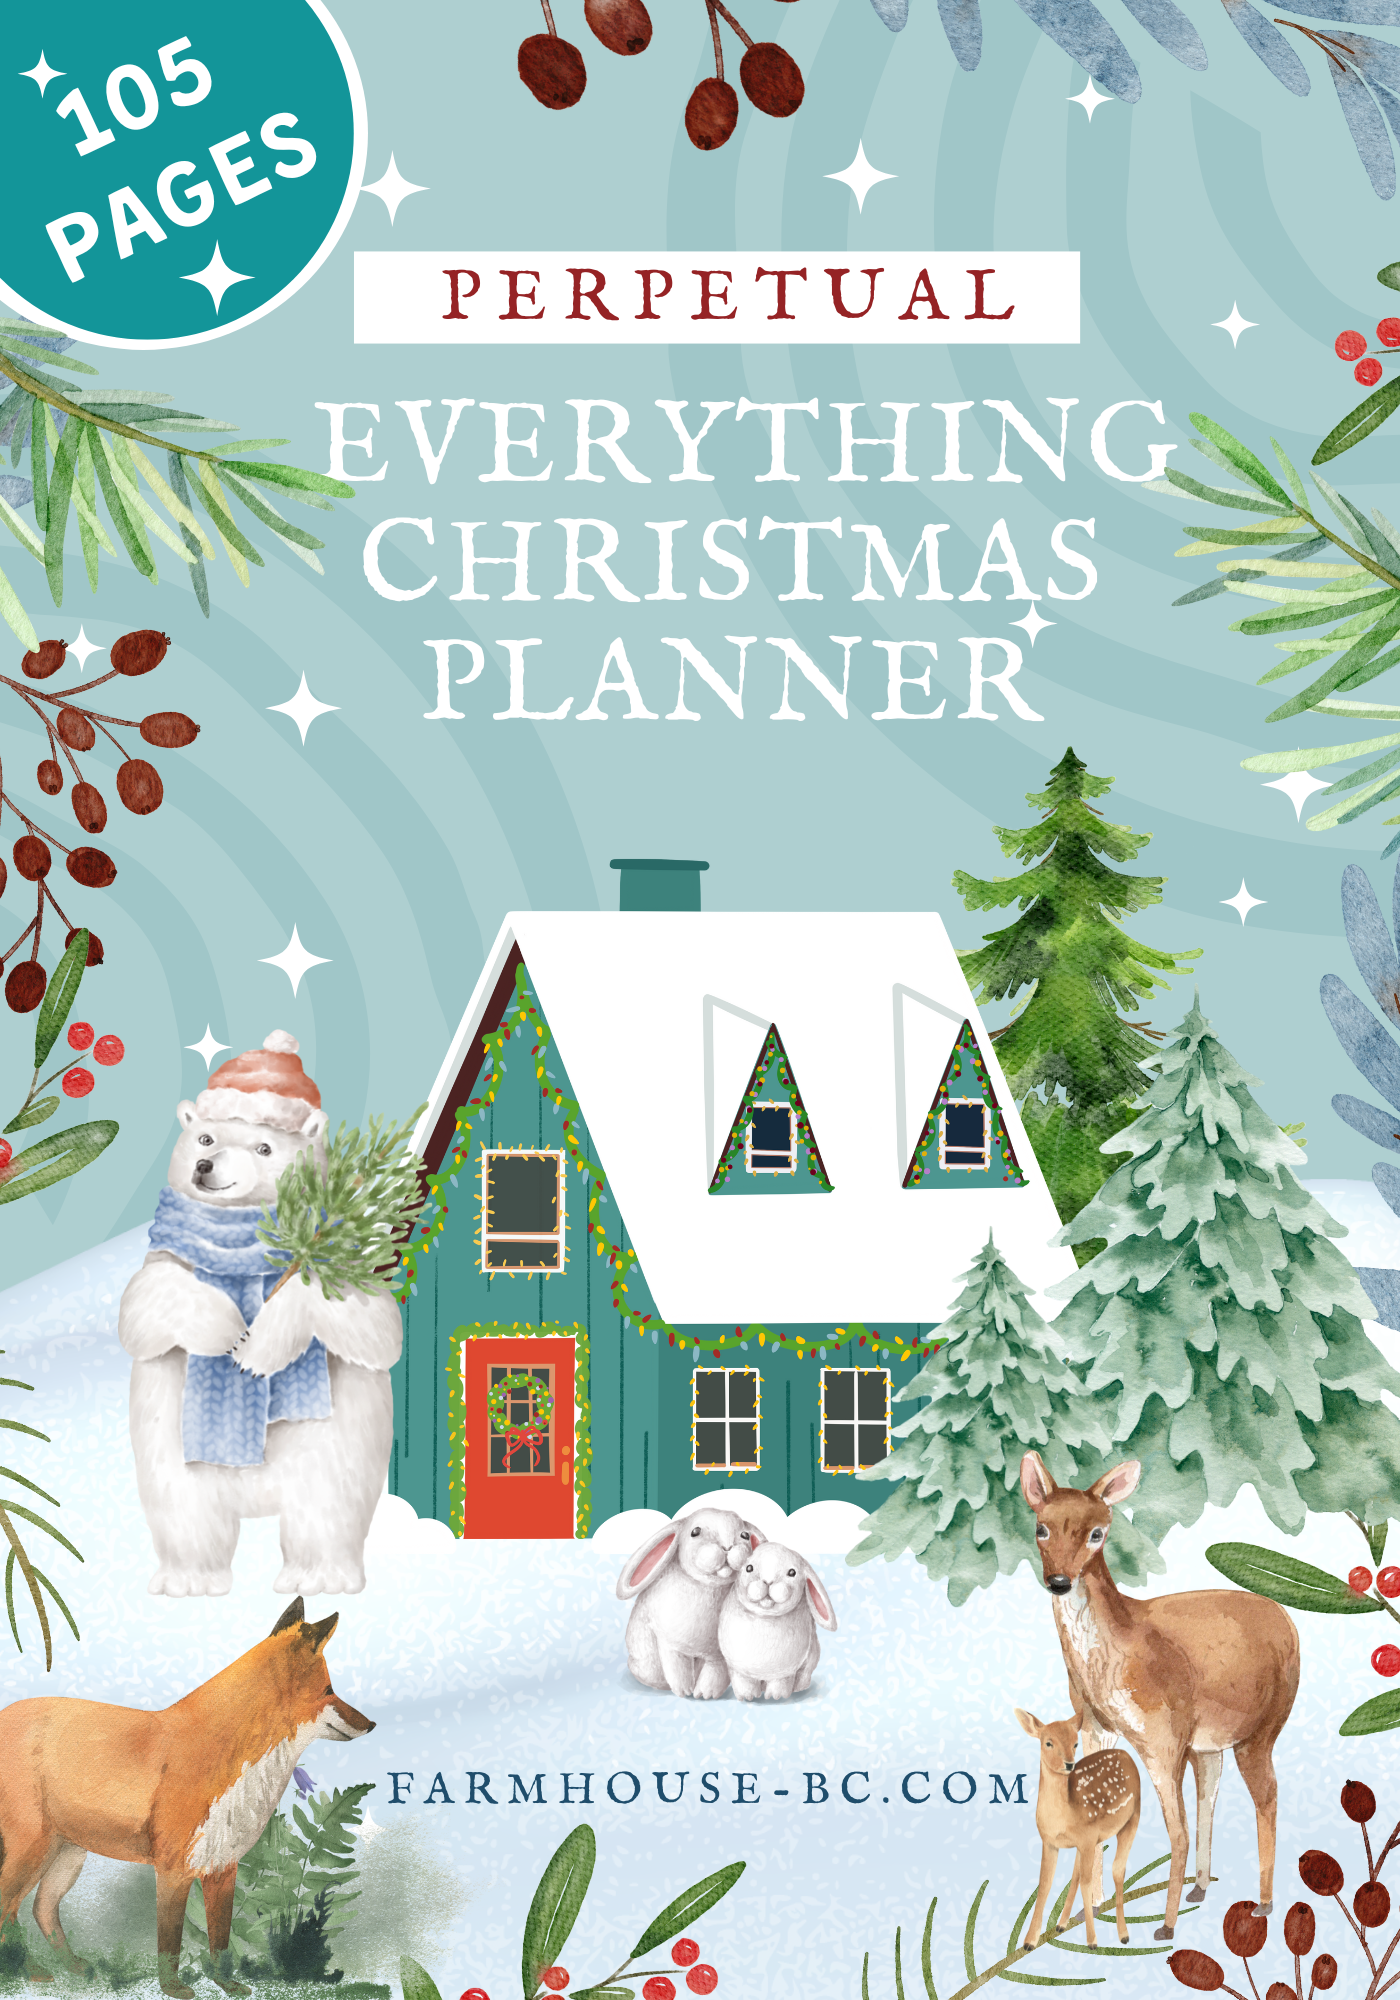 Beautiful Christmas Planner that is perpetual